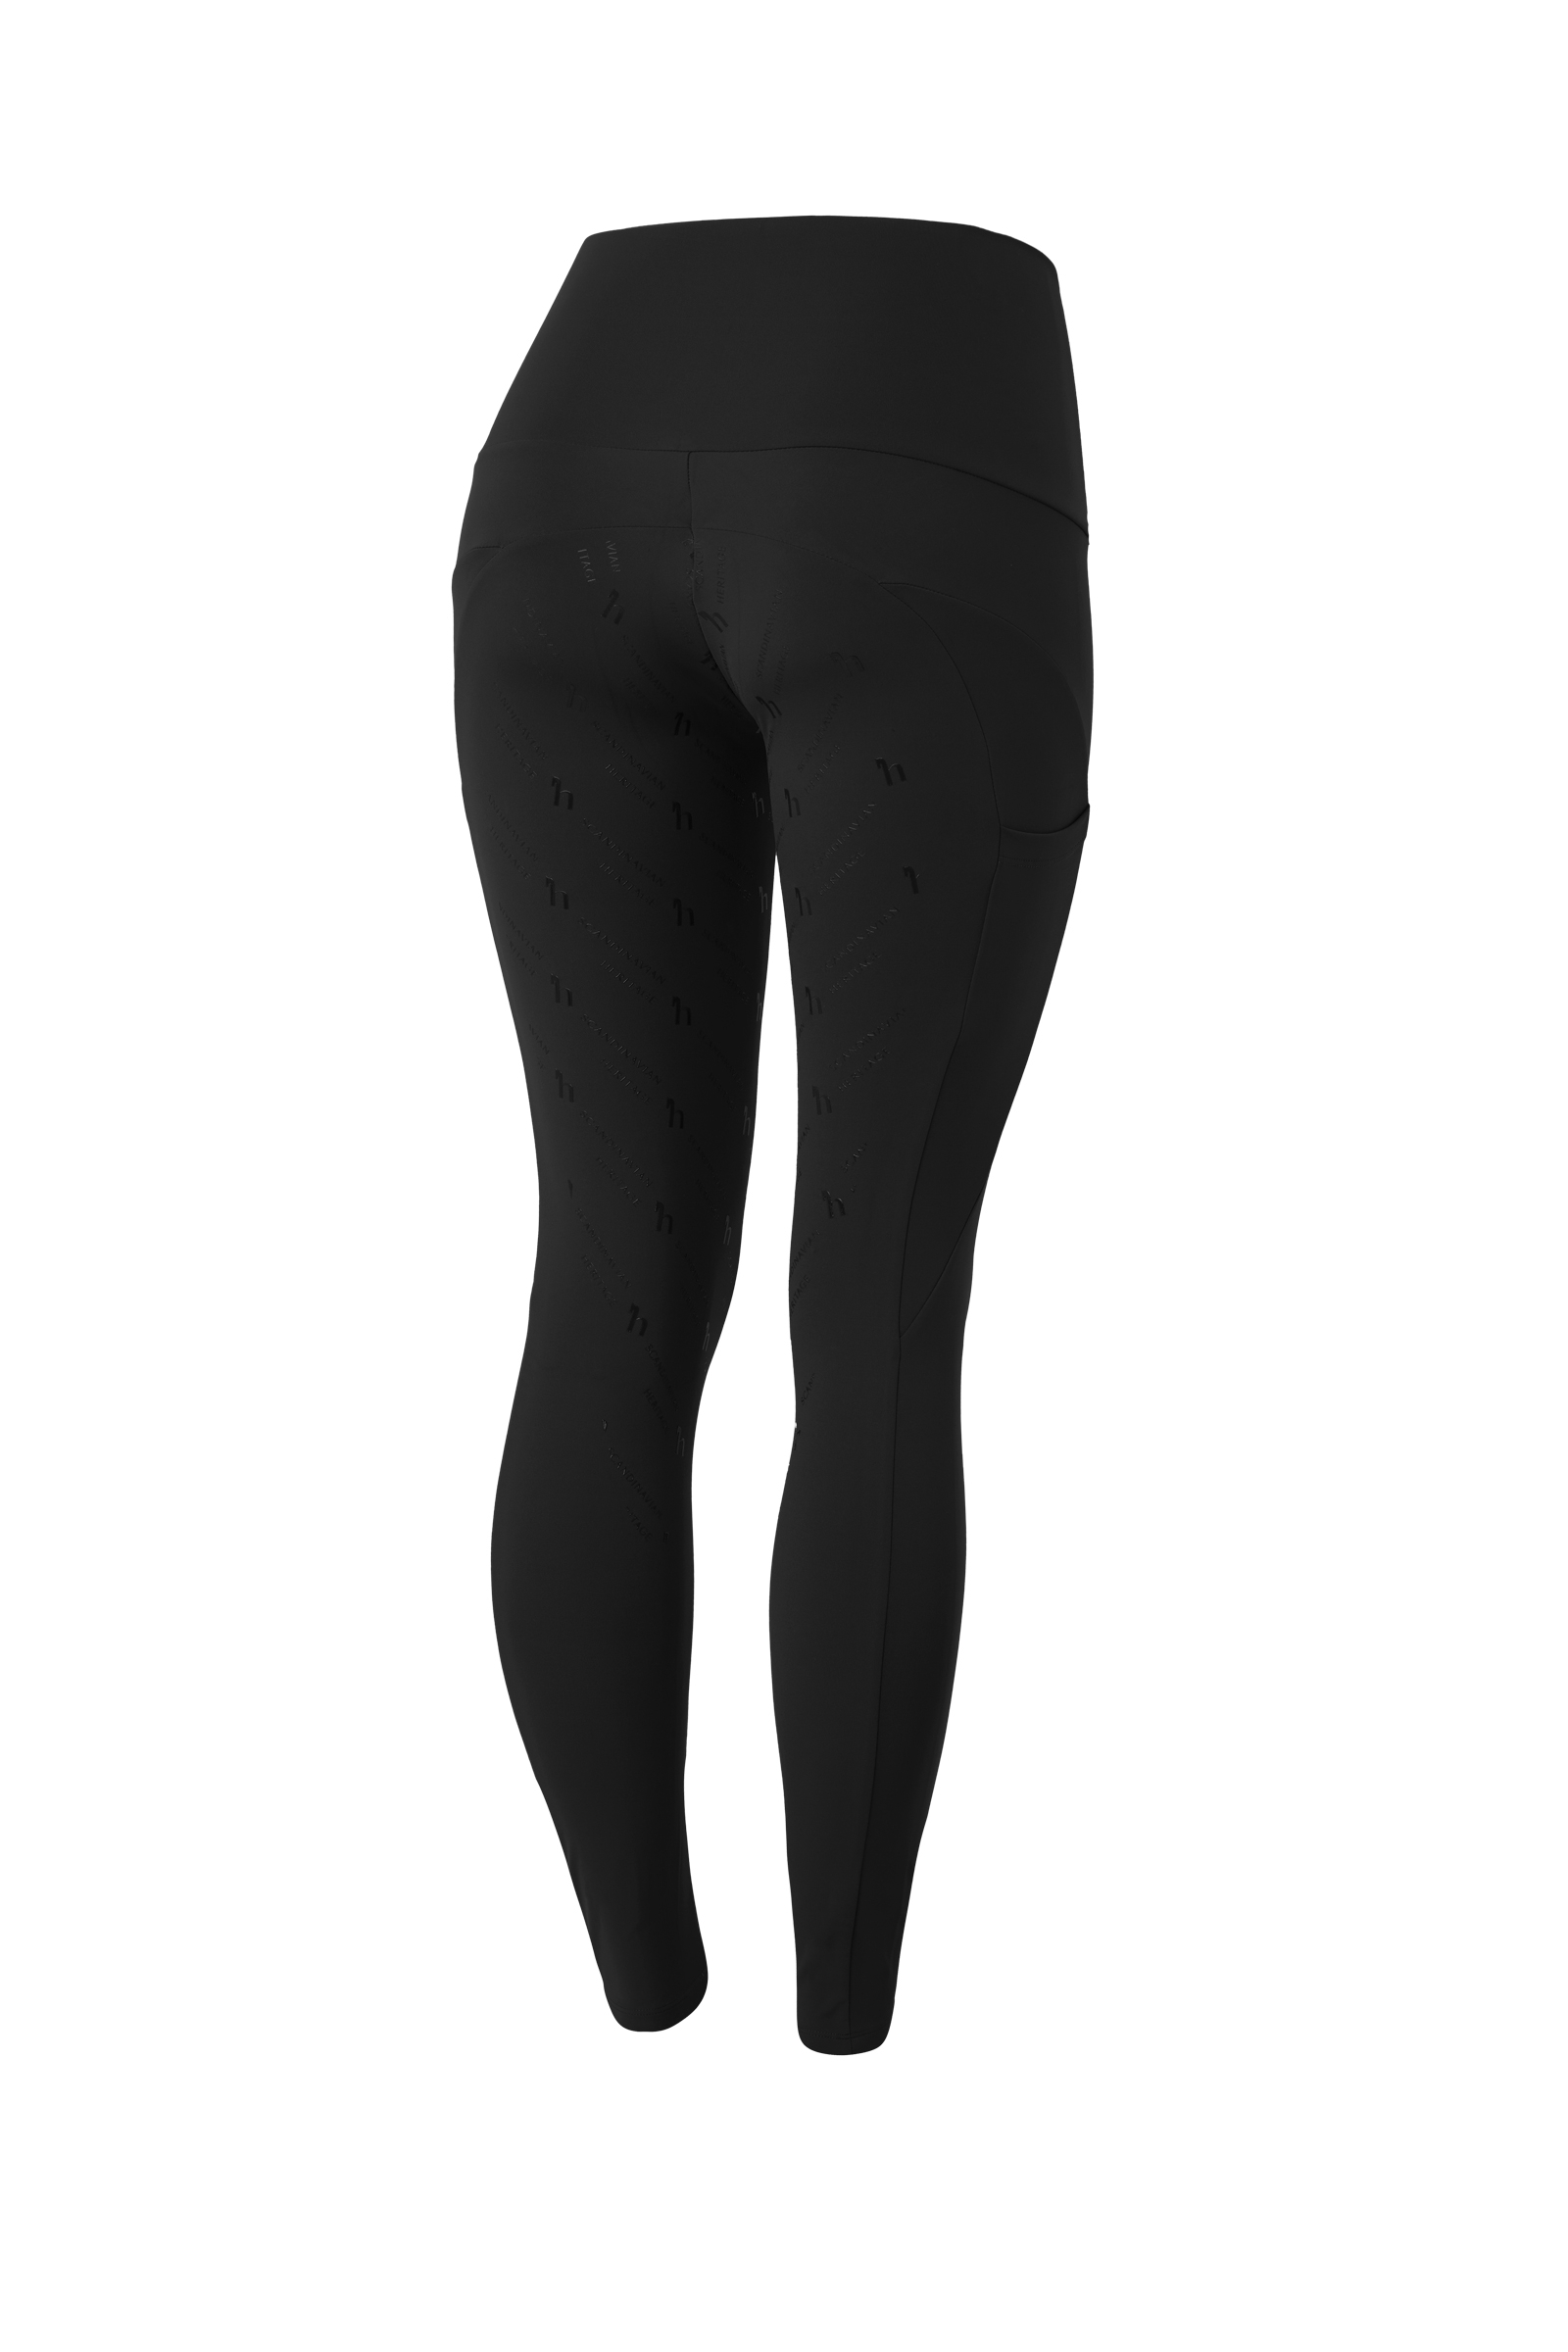 Women's Full Seat Riding Tights | horze.ie